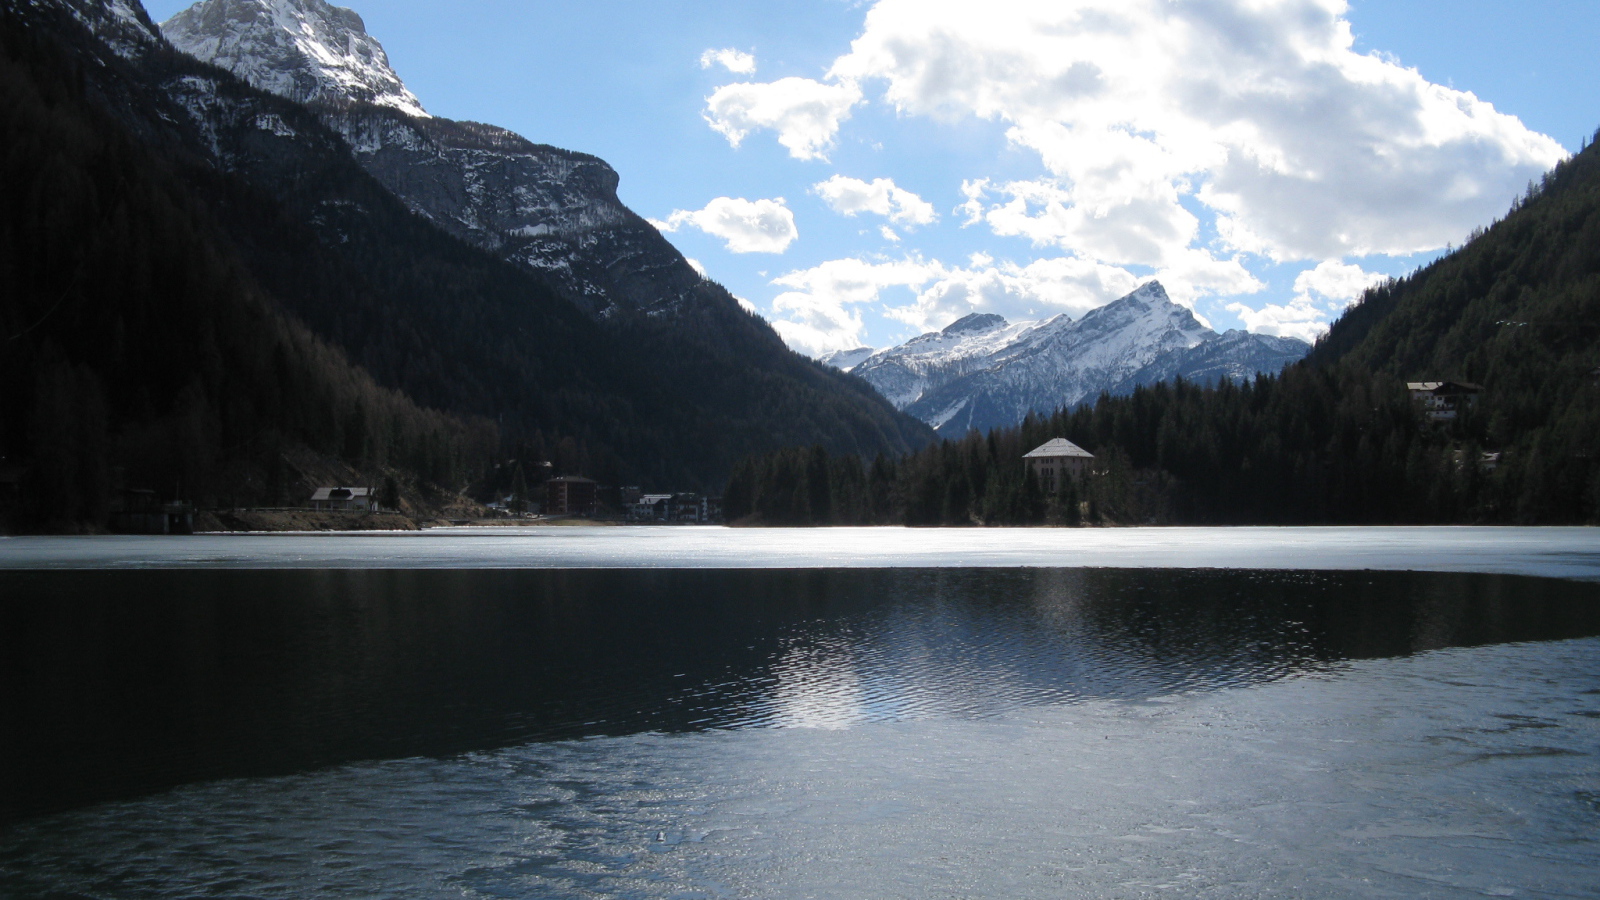 Winter lake in the resort of Alleghe, Italy